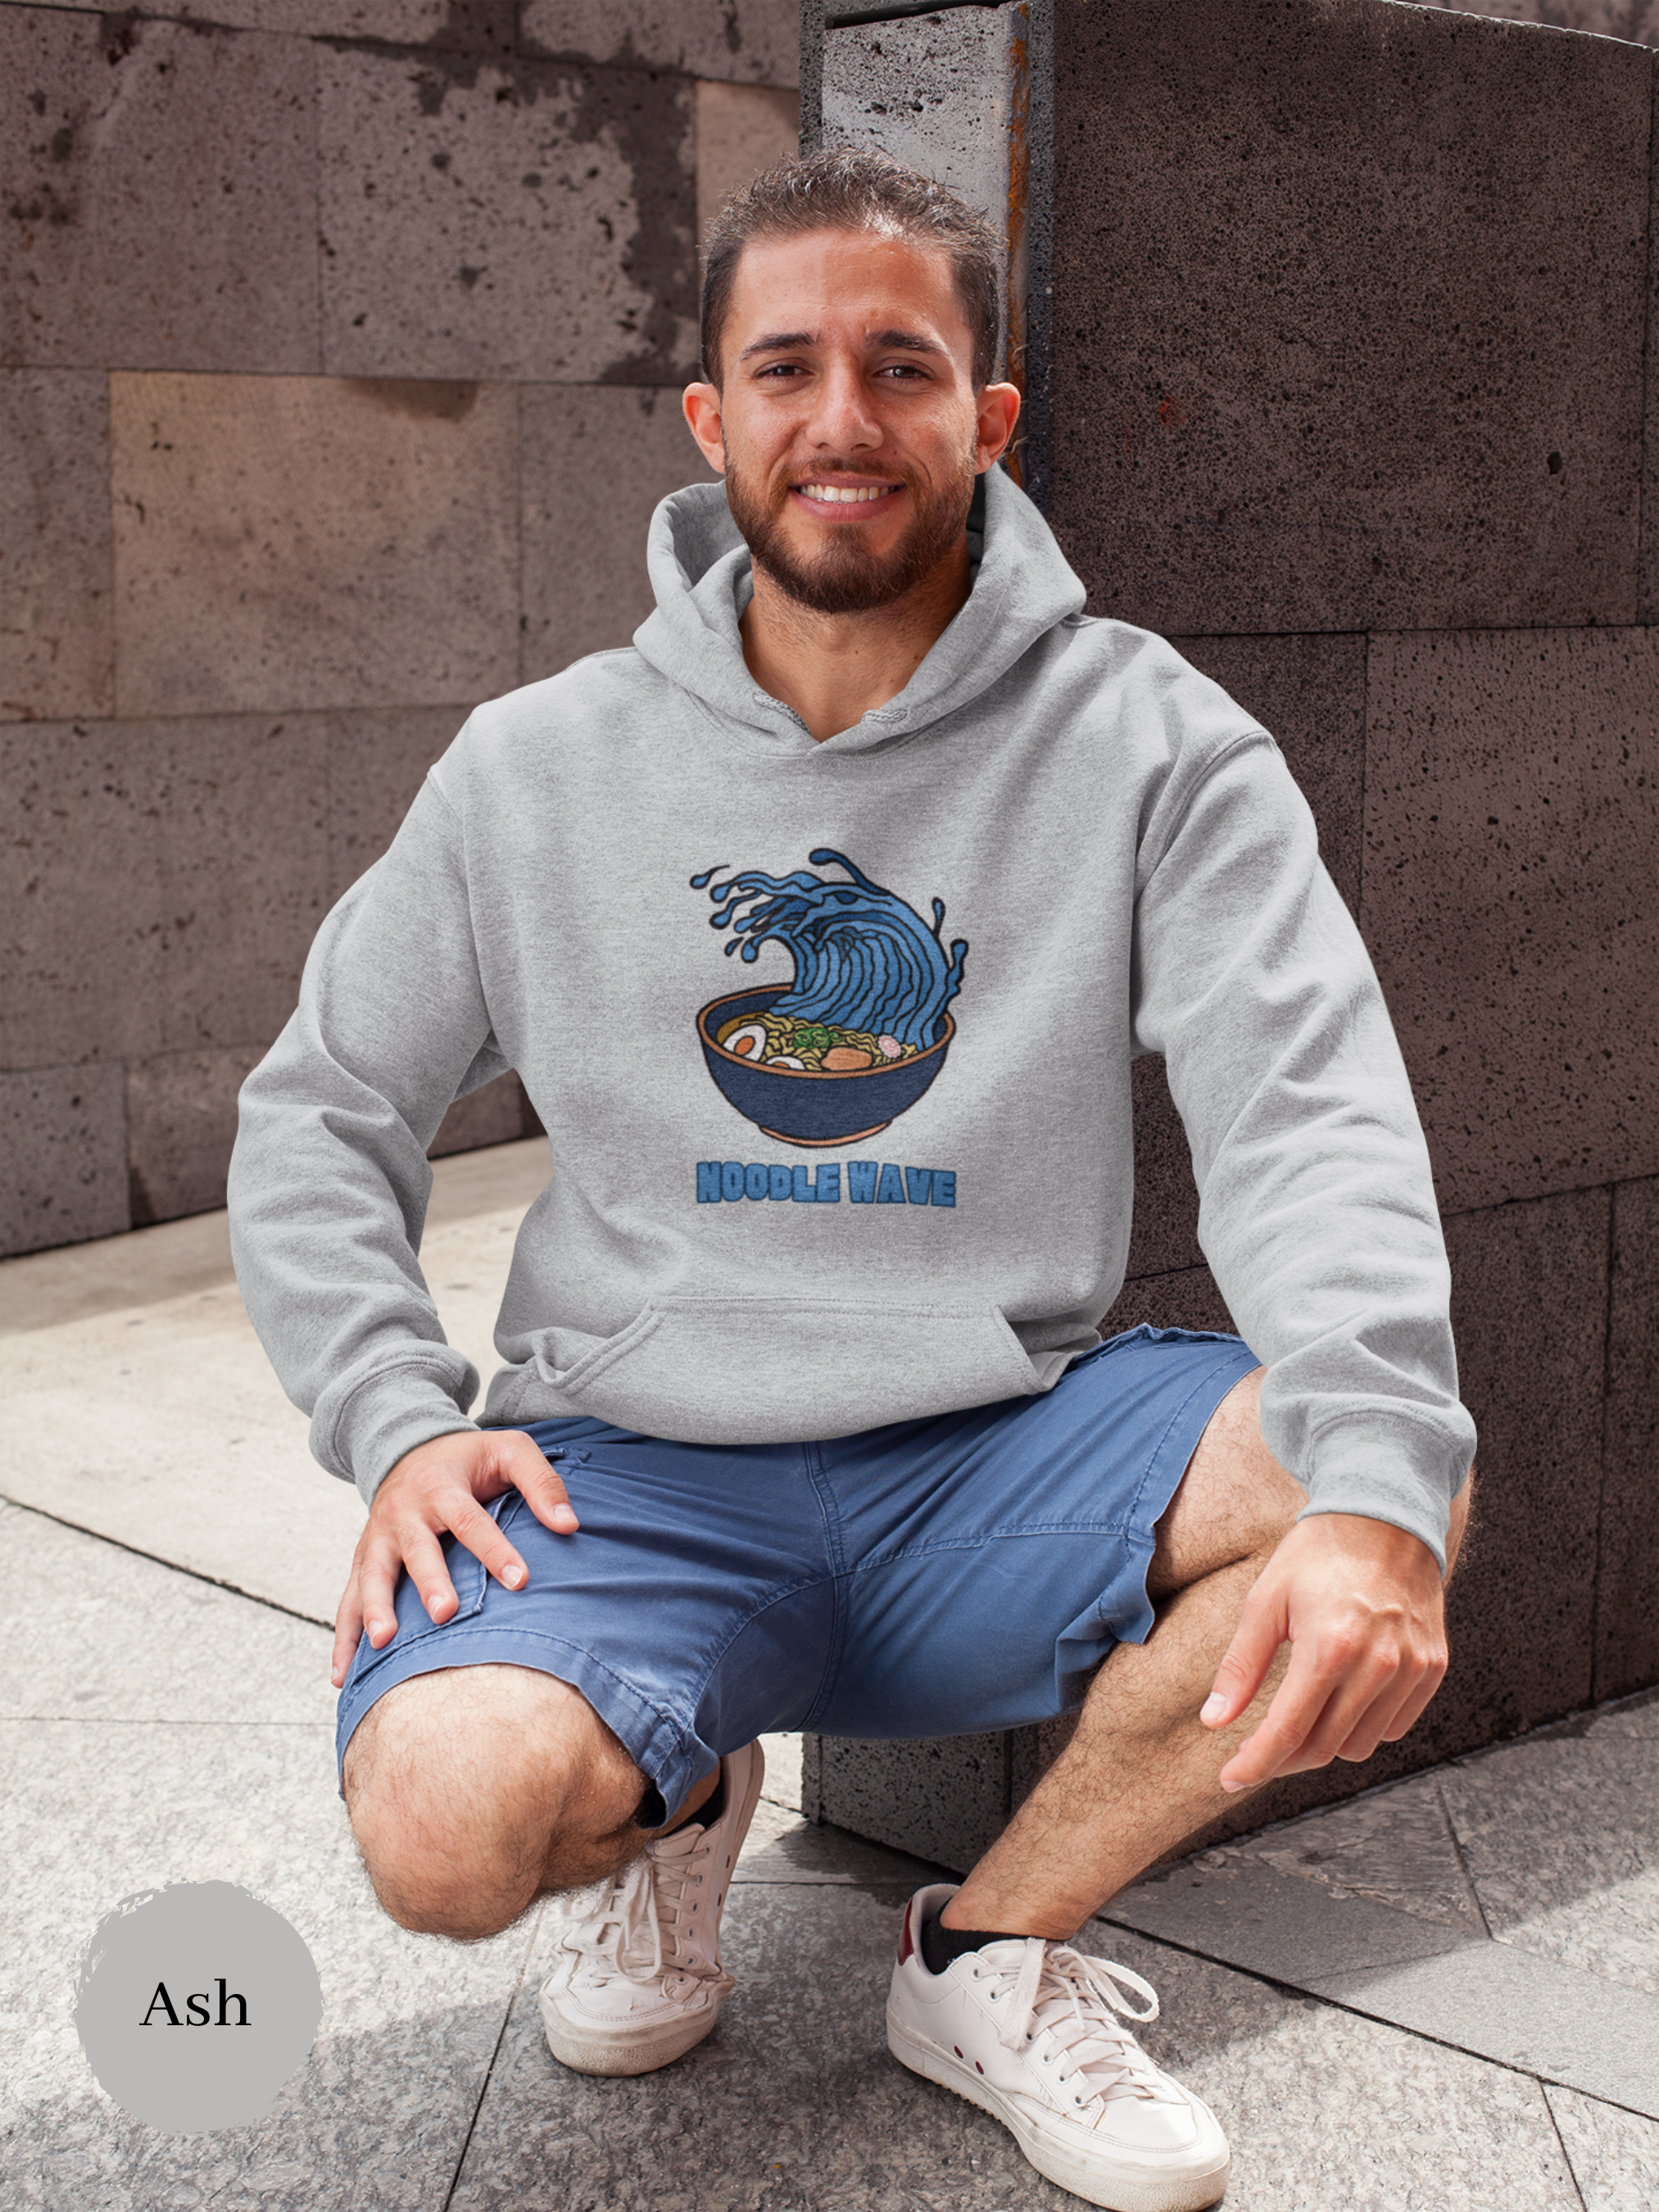 Ramen Hoodie: Noodle Wave - Hokusai-style Ramen Art Sweatshirt for Foodie Lovers and Asian Food Enthusiasts